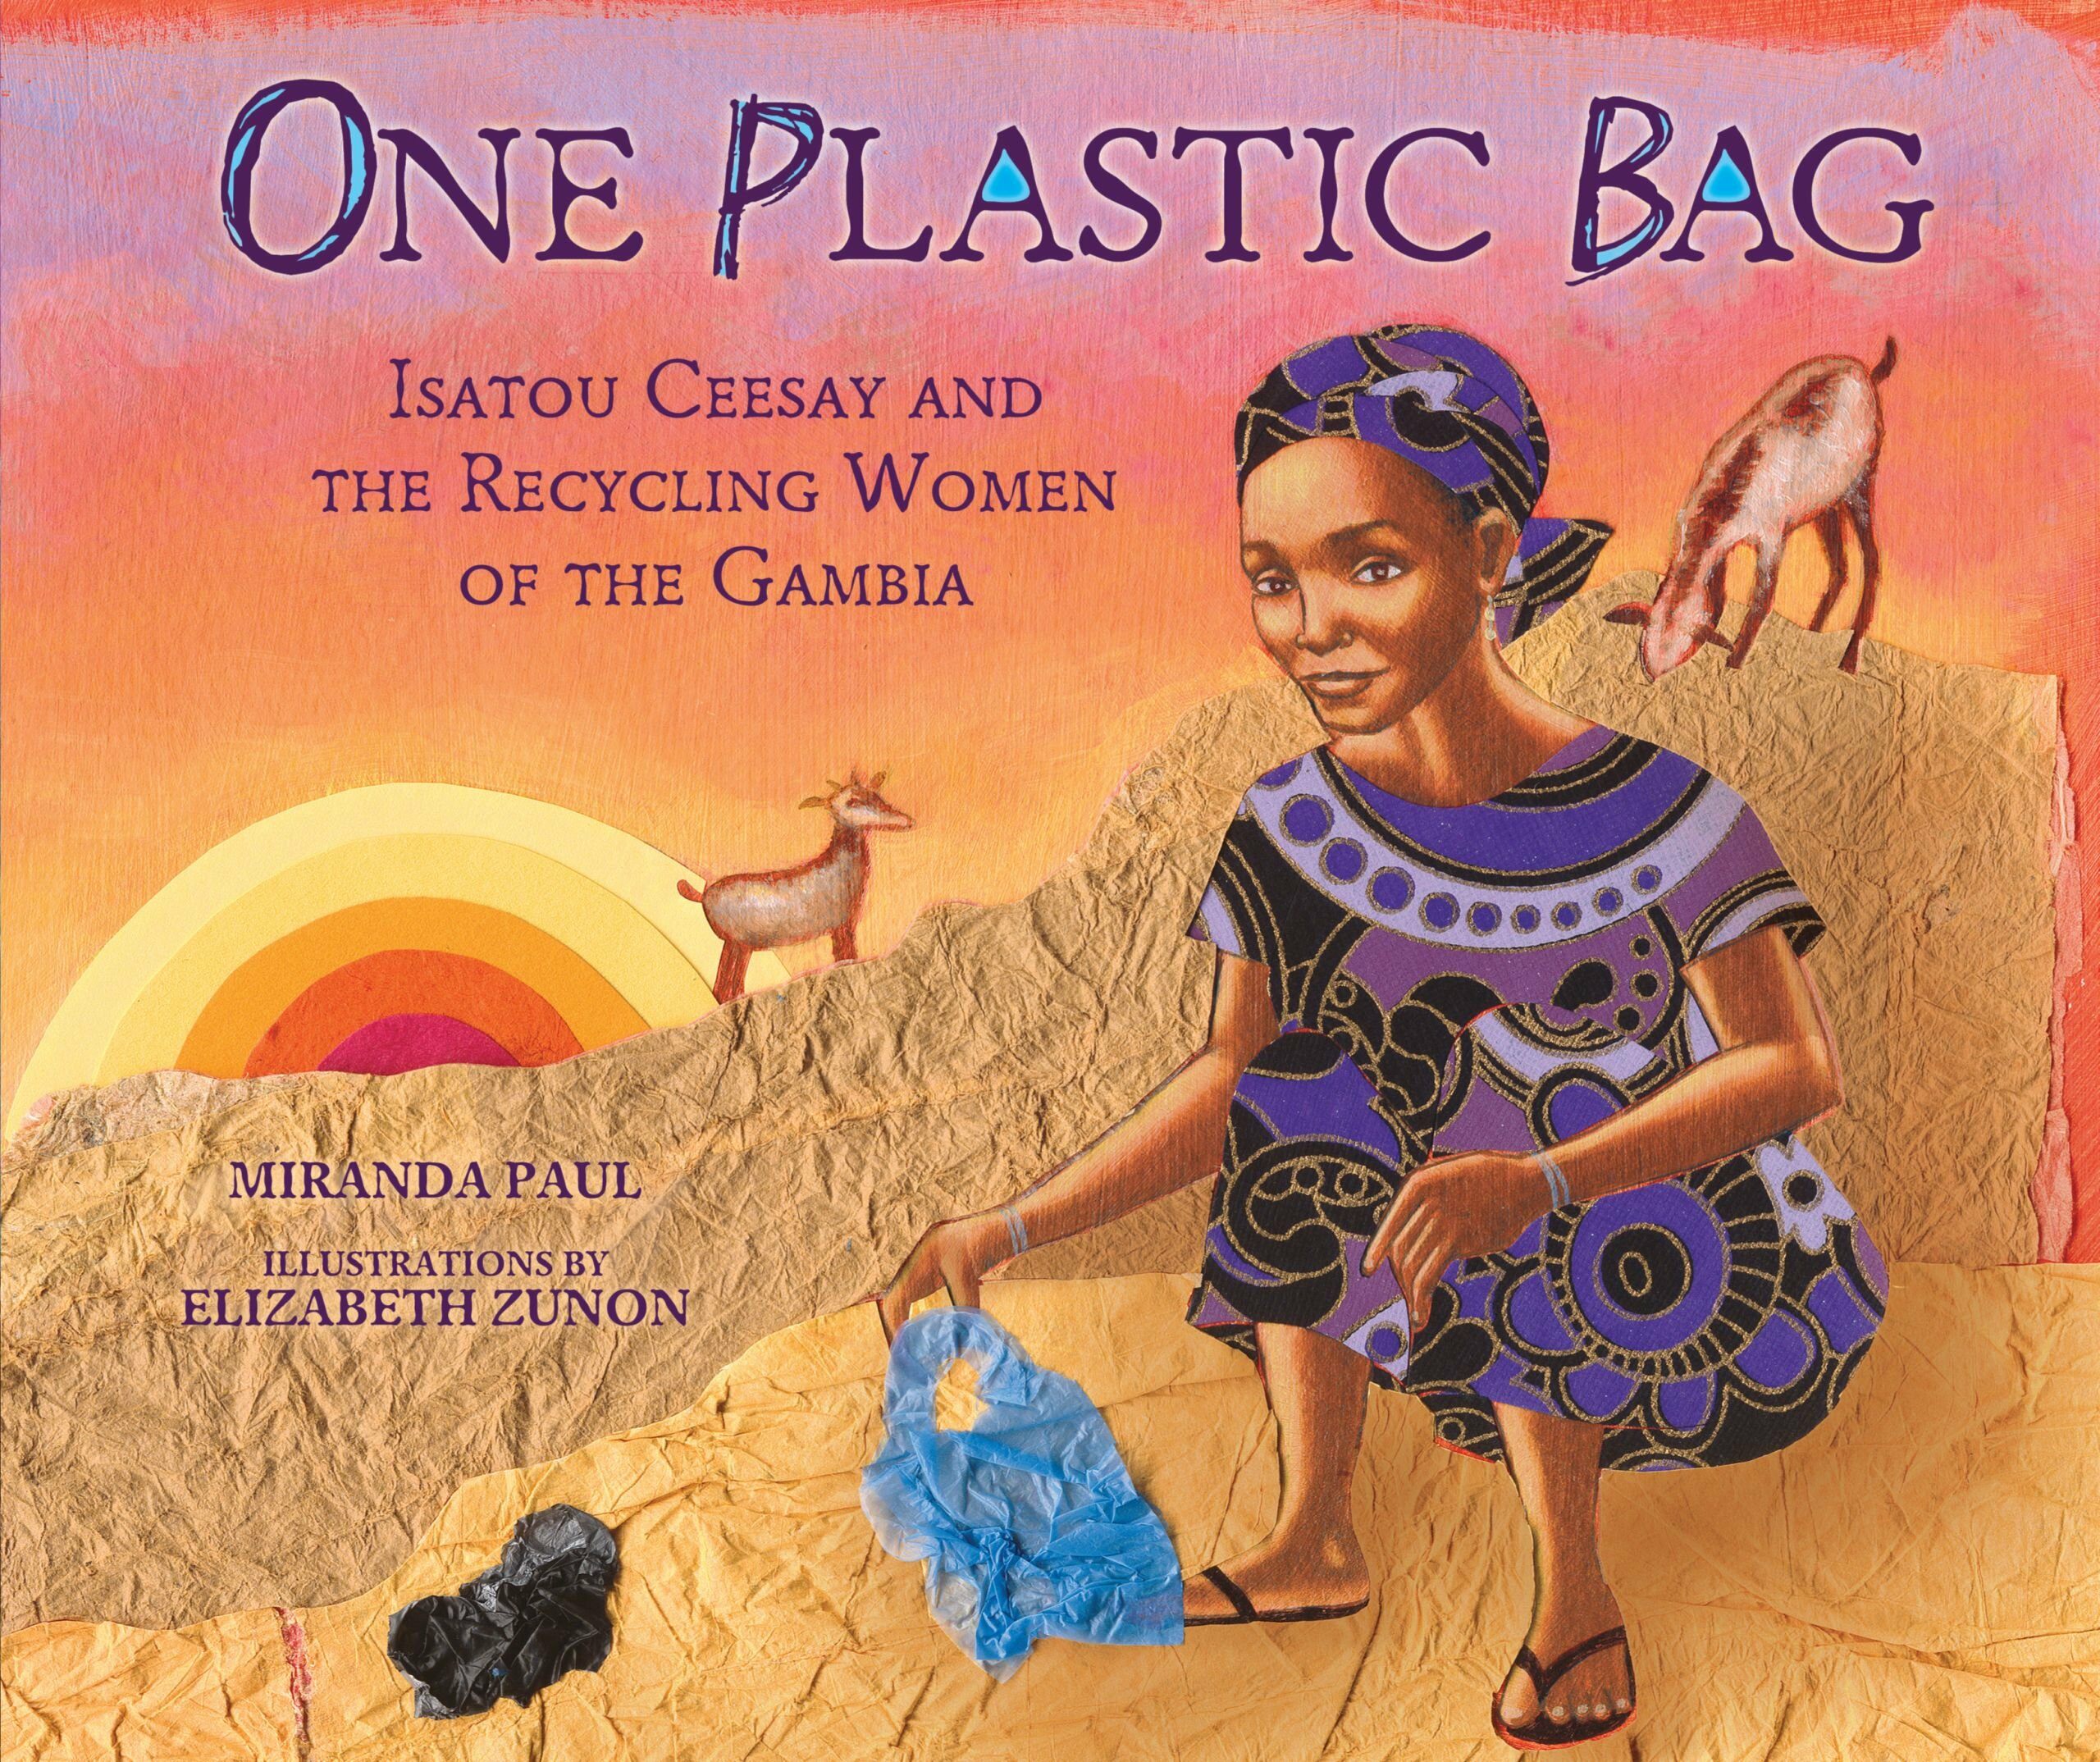 One Plastic Bag: Isatou Ceesay and the Recycling Women of the Gambia (Hardcover)